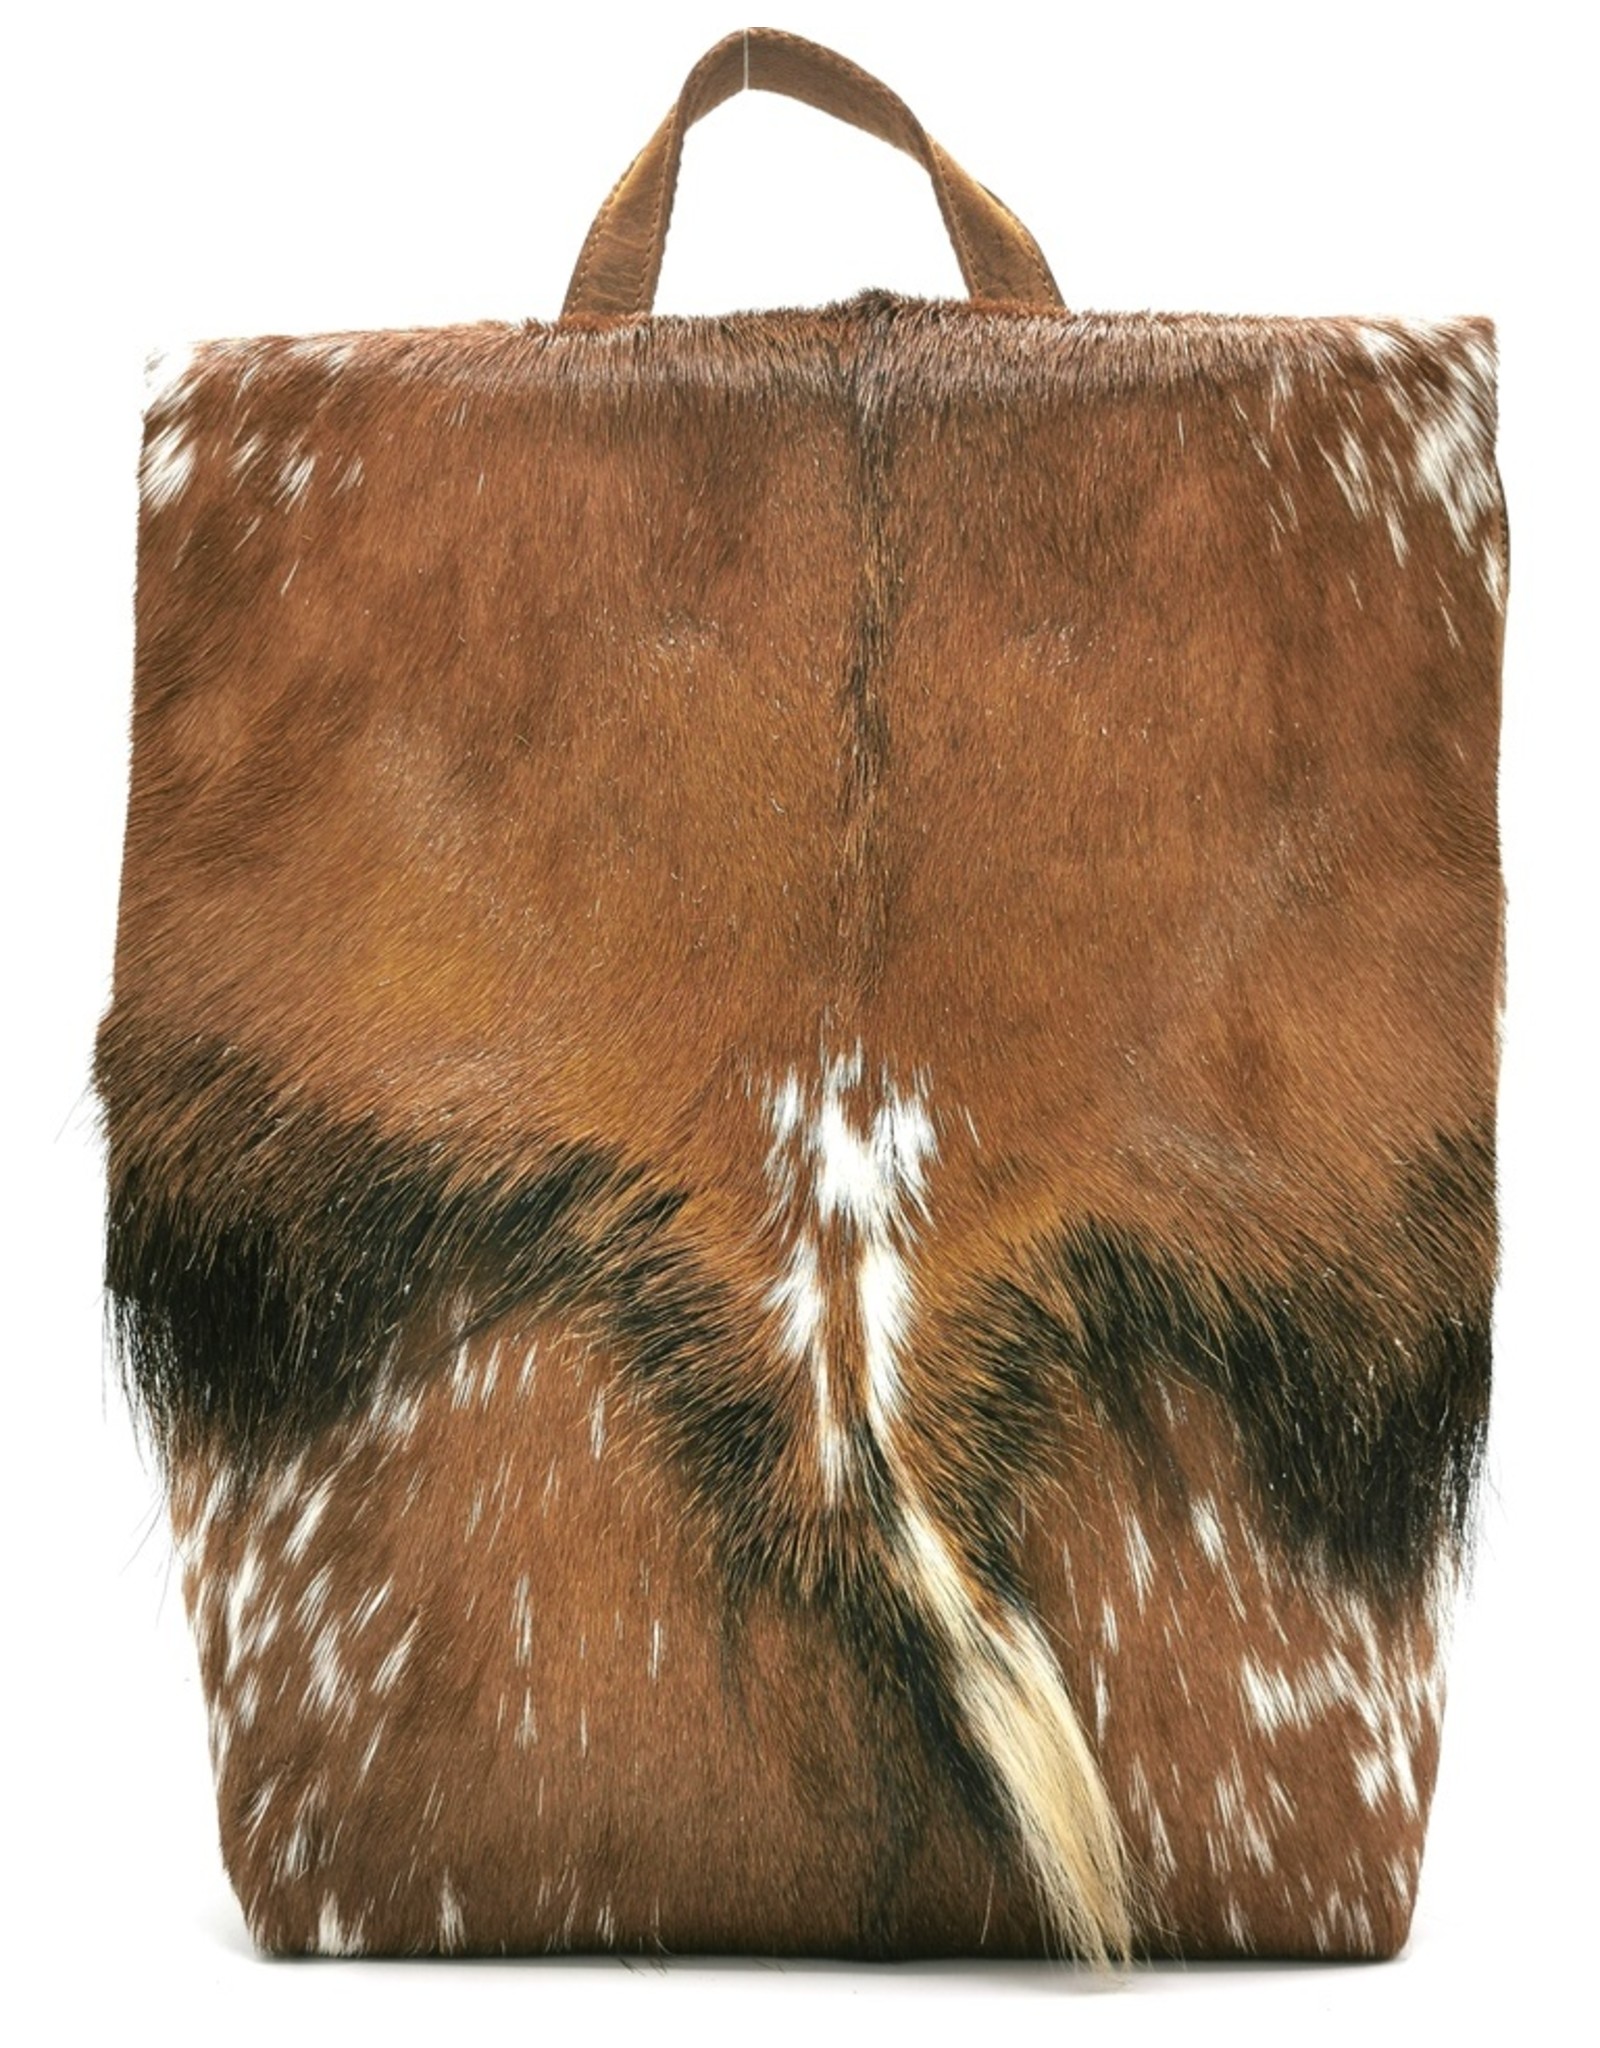 Hide & Stitches Leather backpacks  and leather shoppers - Hide & Stitches Leather Backpack with Fur Cover Brown - 3